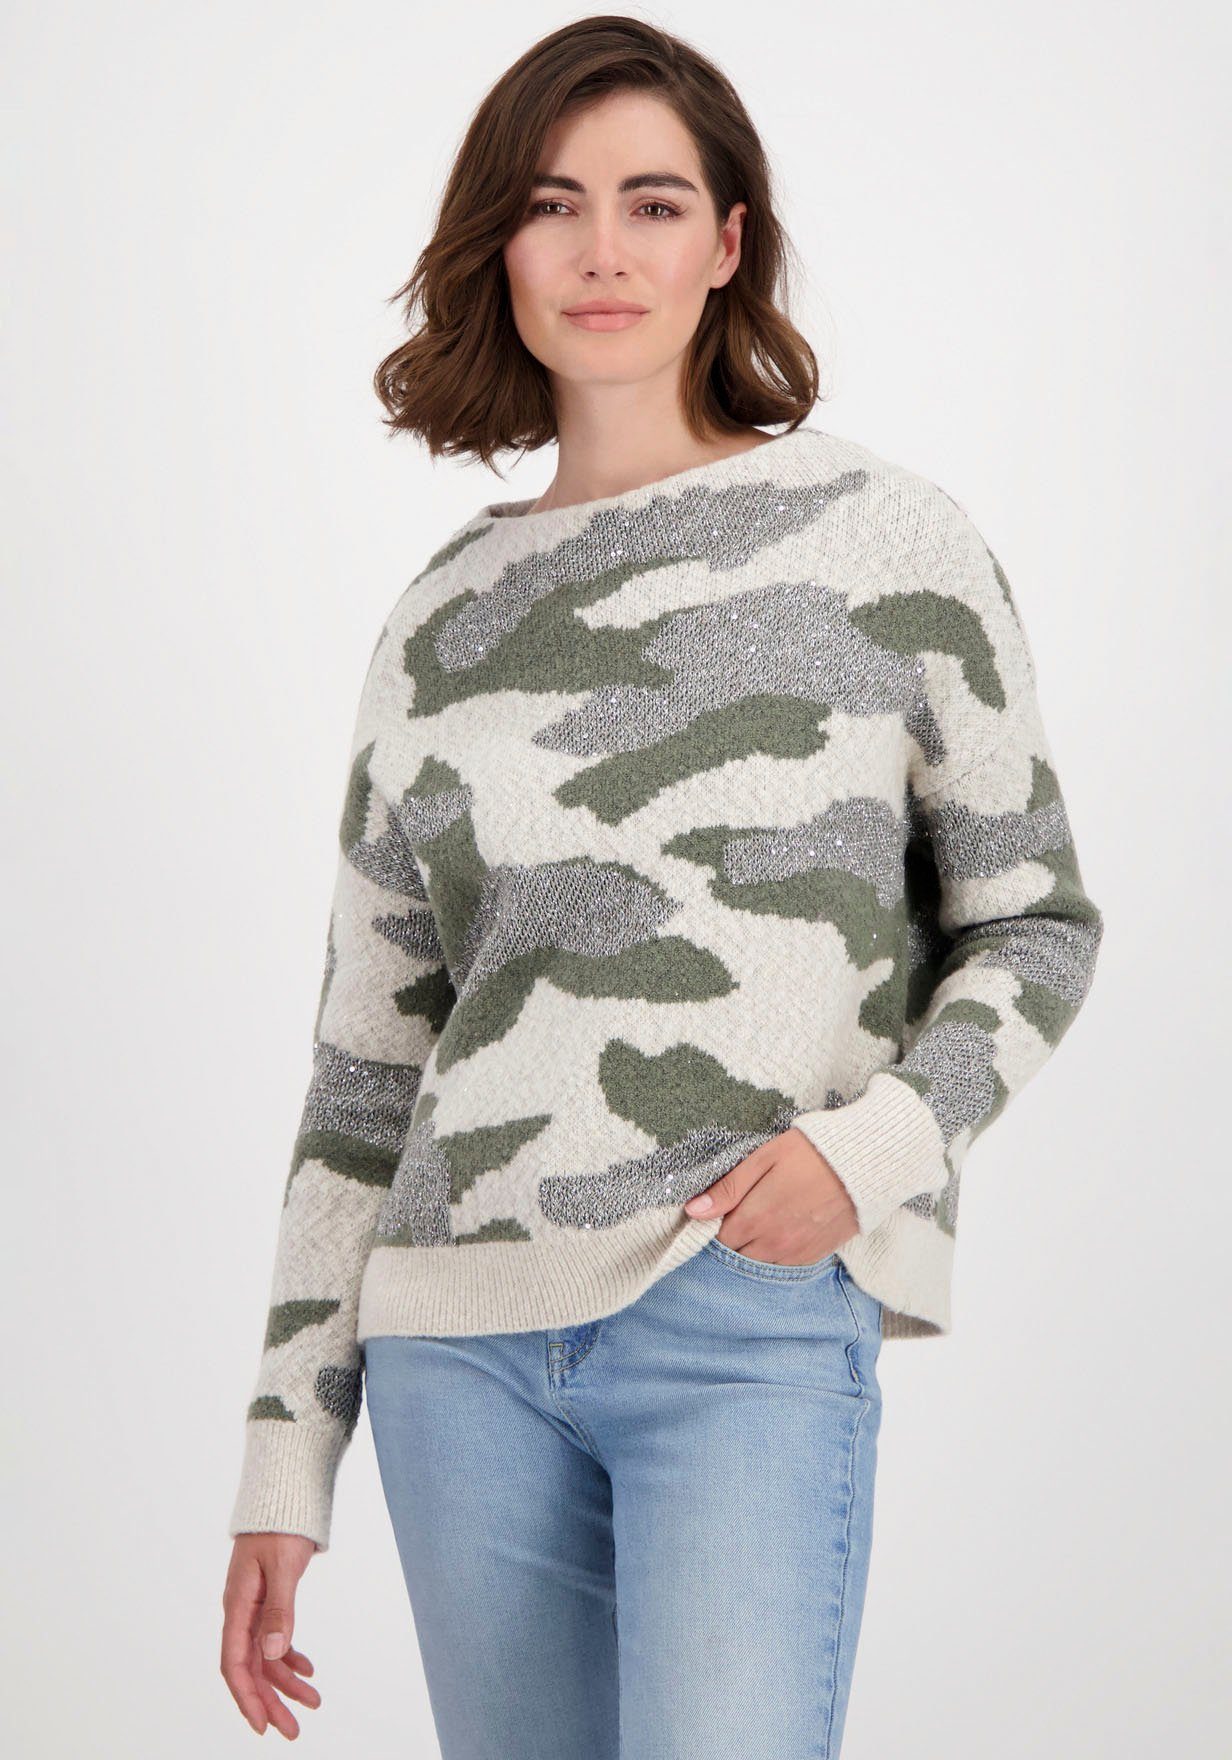 Monari Strickpullover Pullover Camouflage in Camouflage Muster